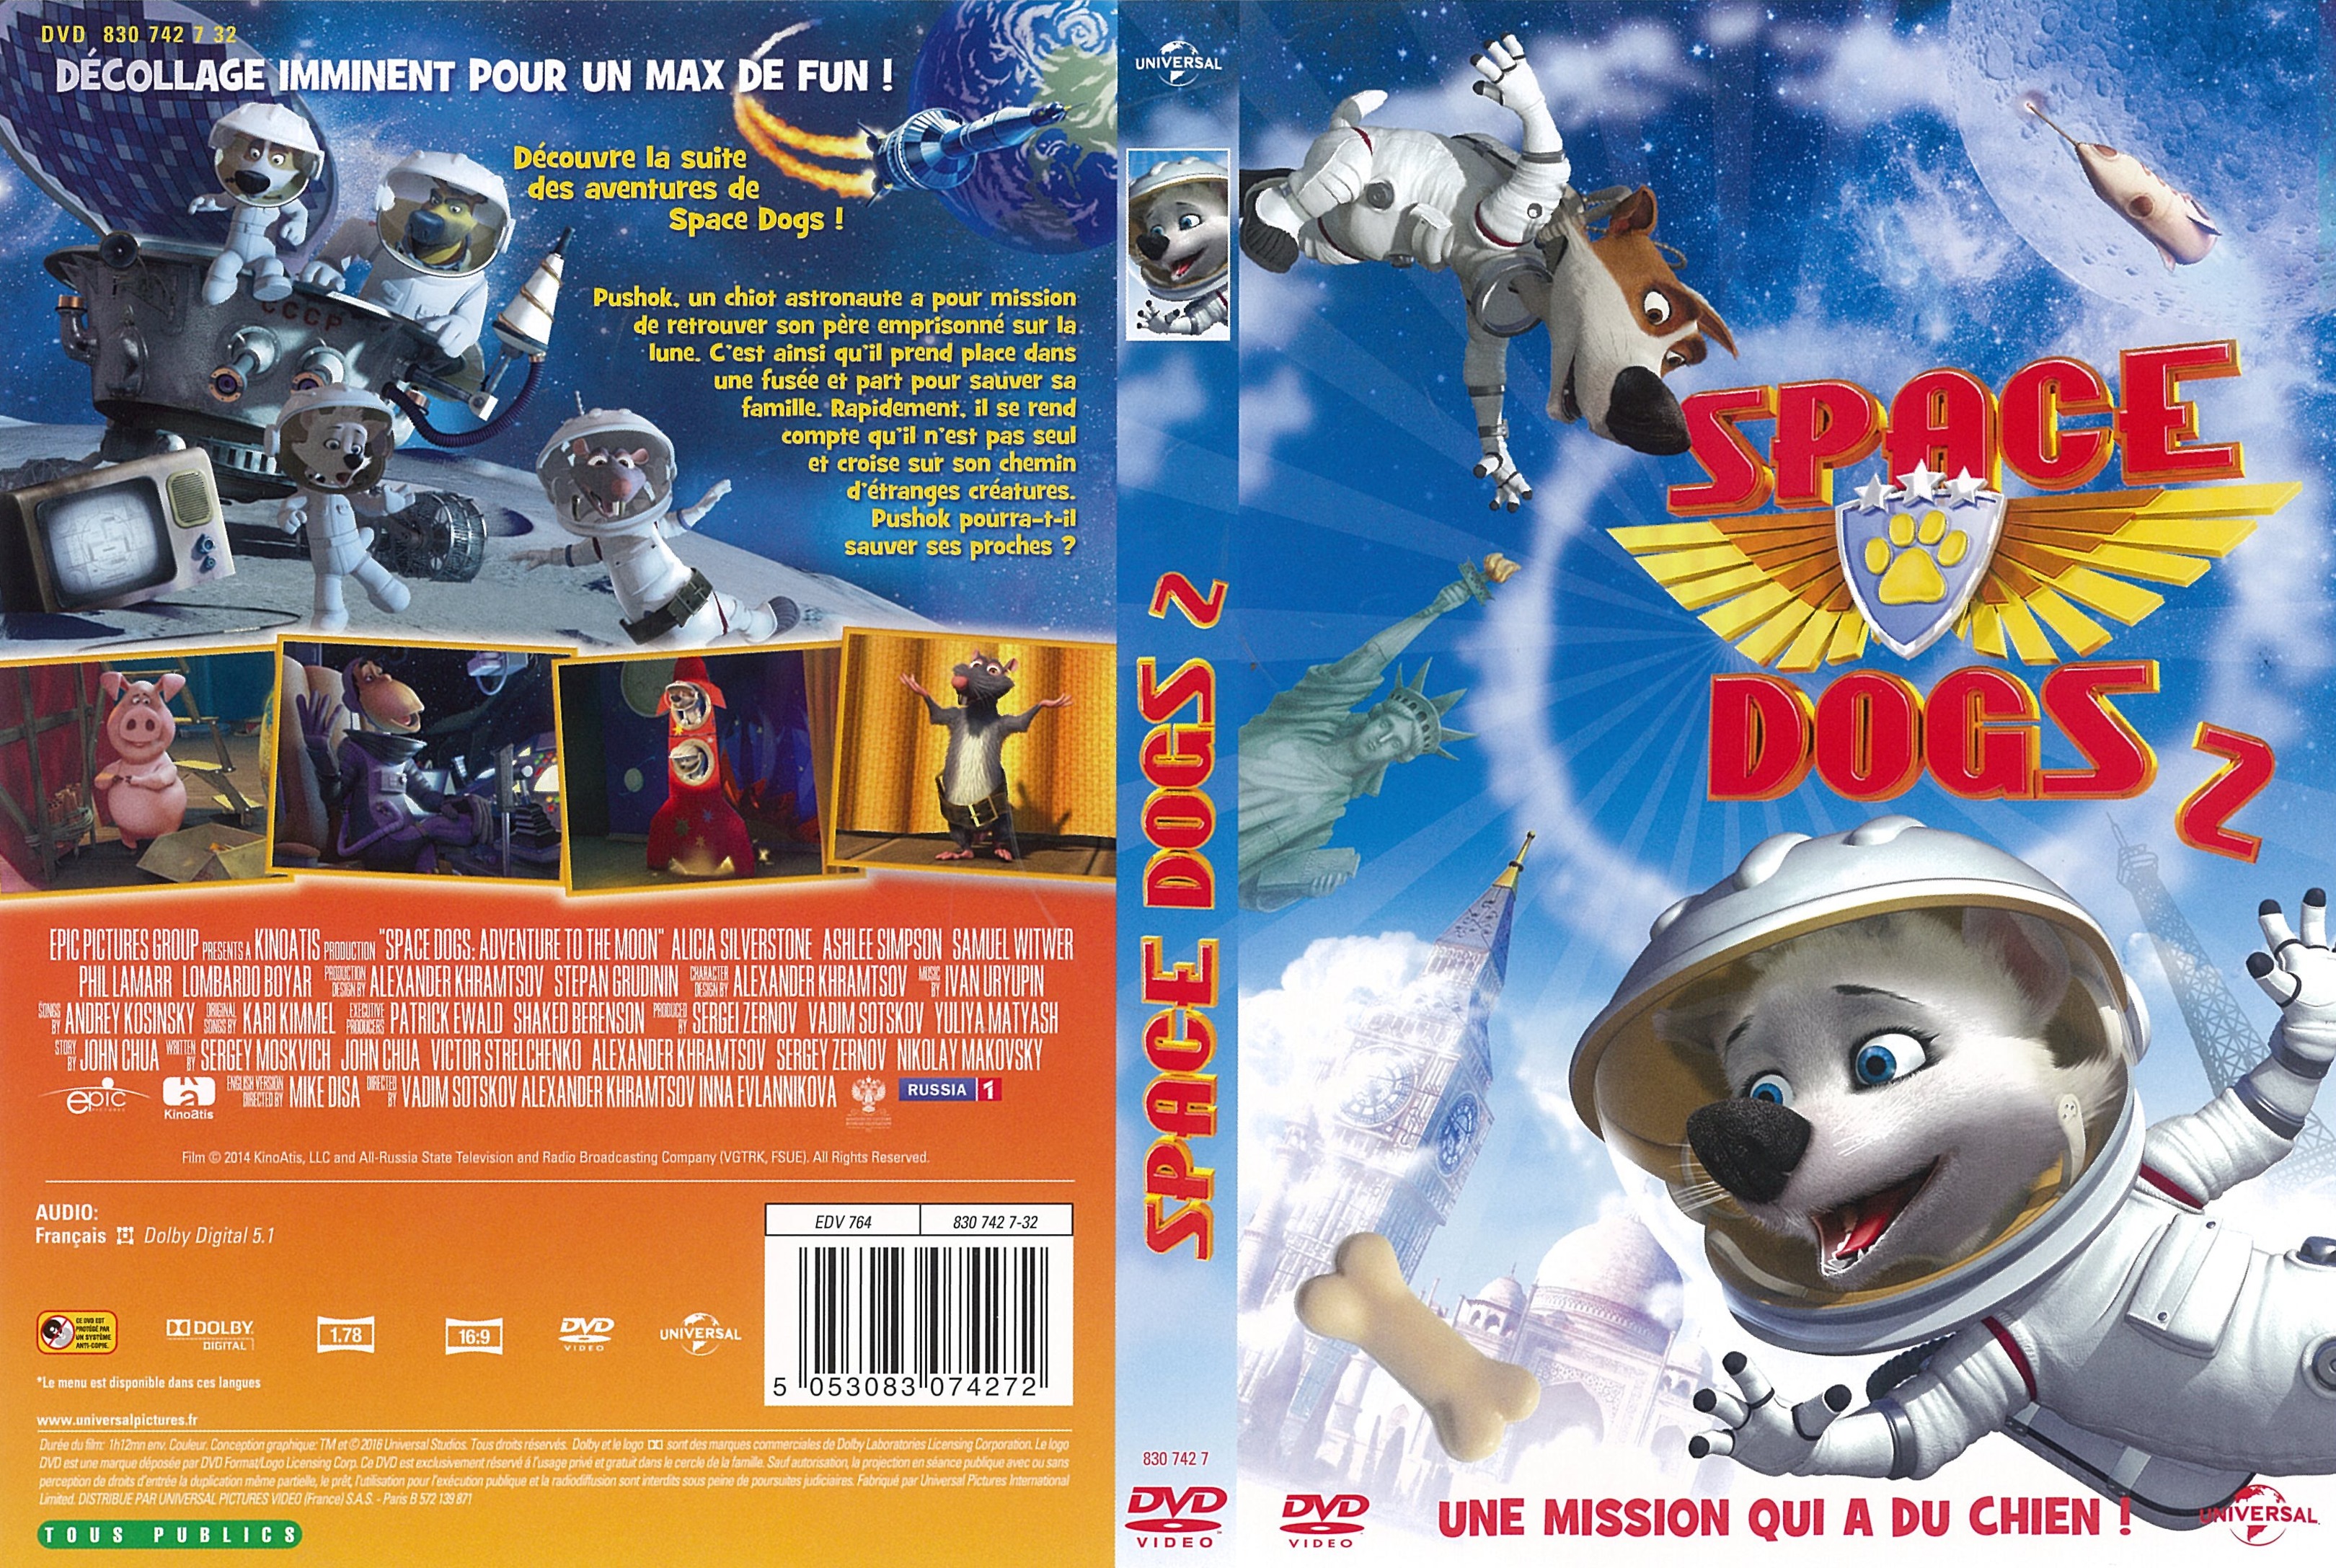 Jaquette DVD Space Dogs 2